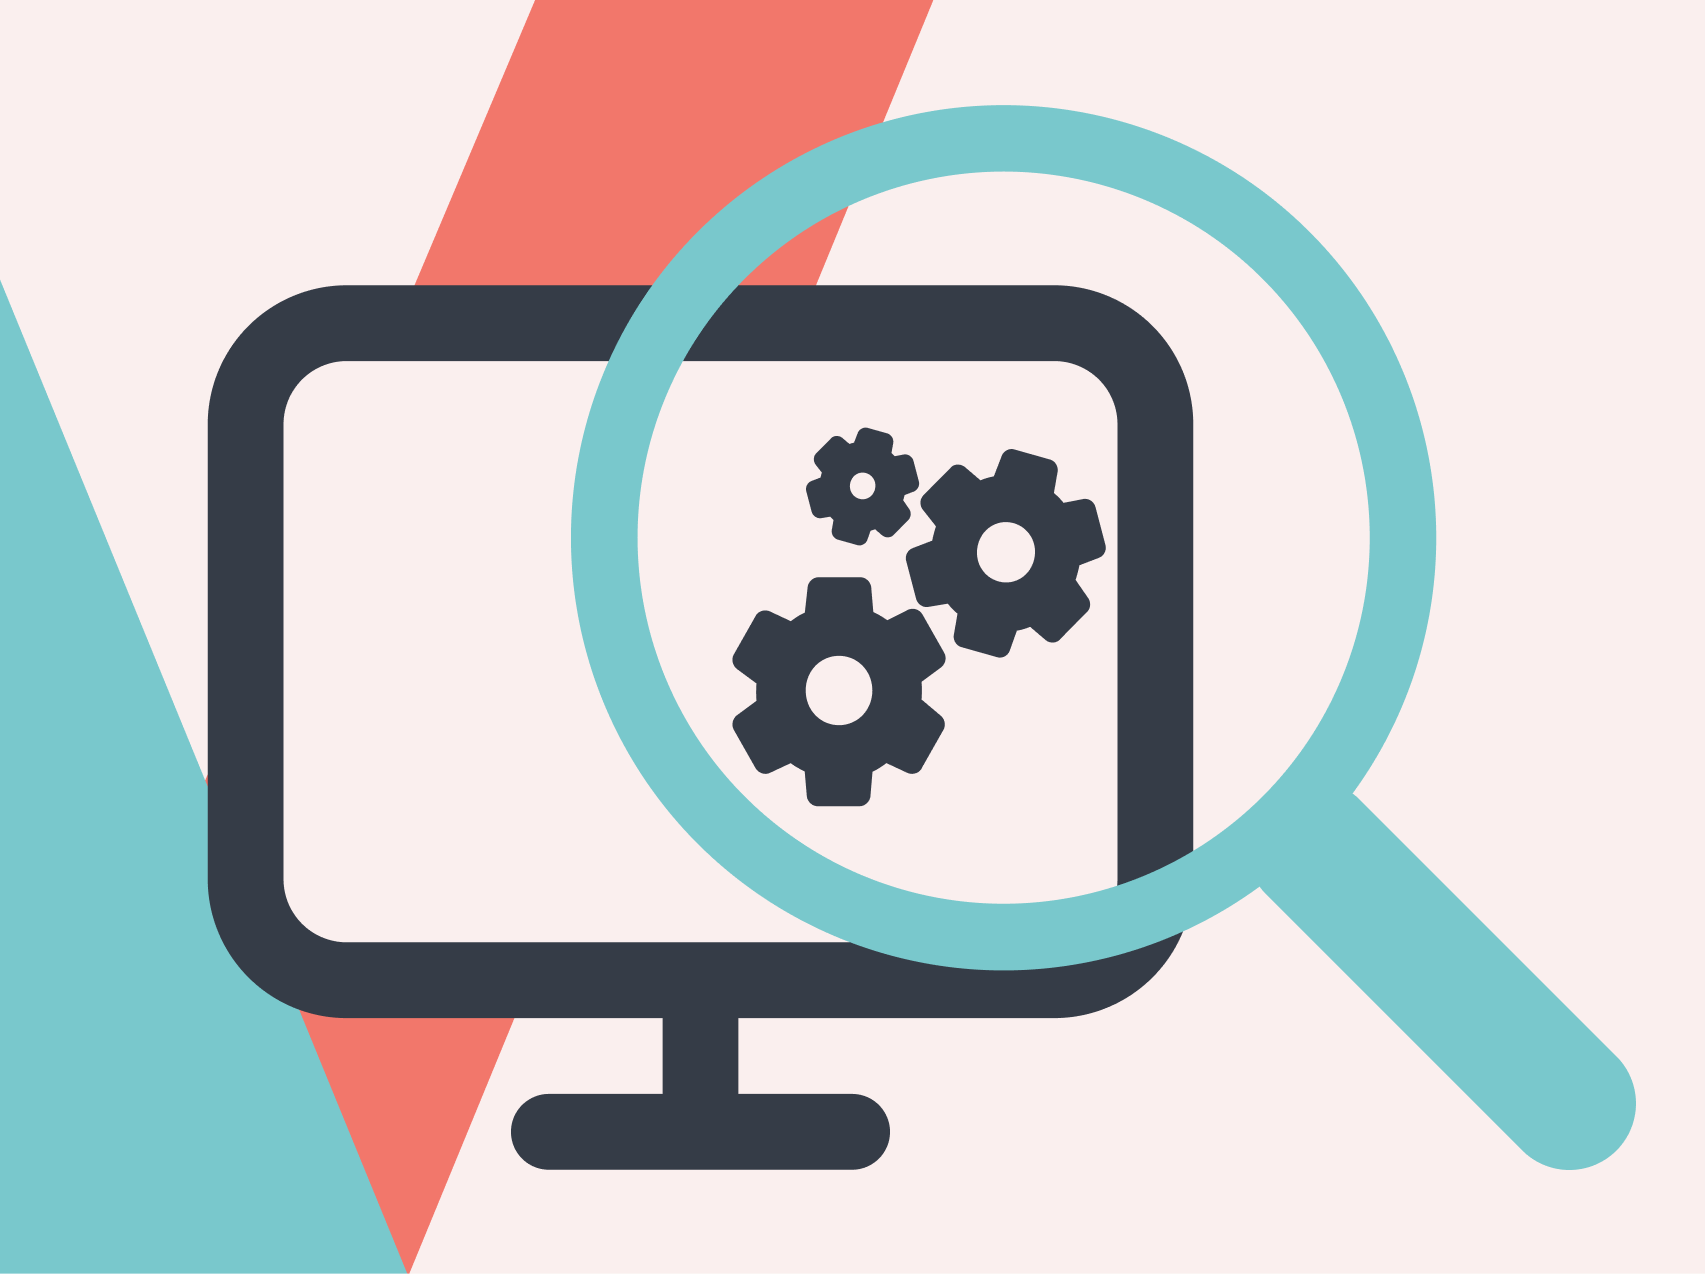 The image consists of twIn the picture - a computer with three gears and a magnifying glass, symbolizing technical SEO 